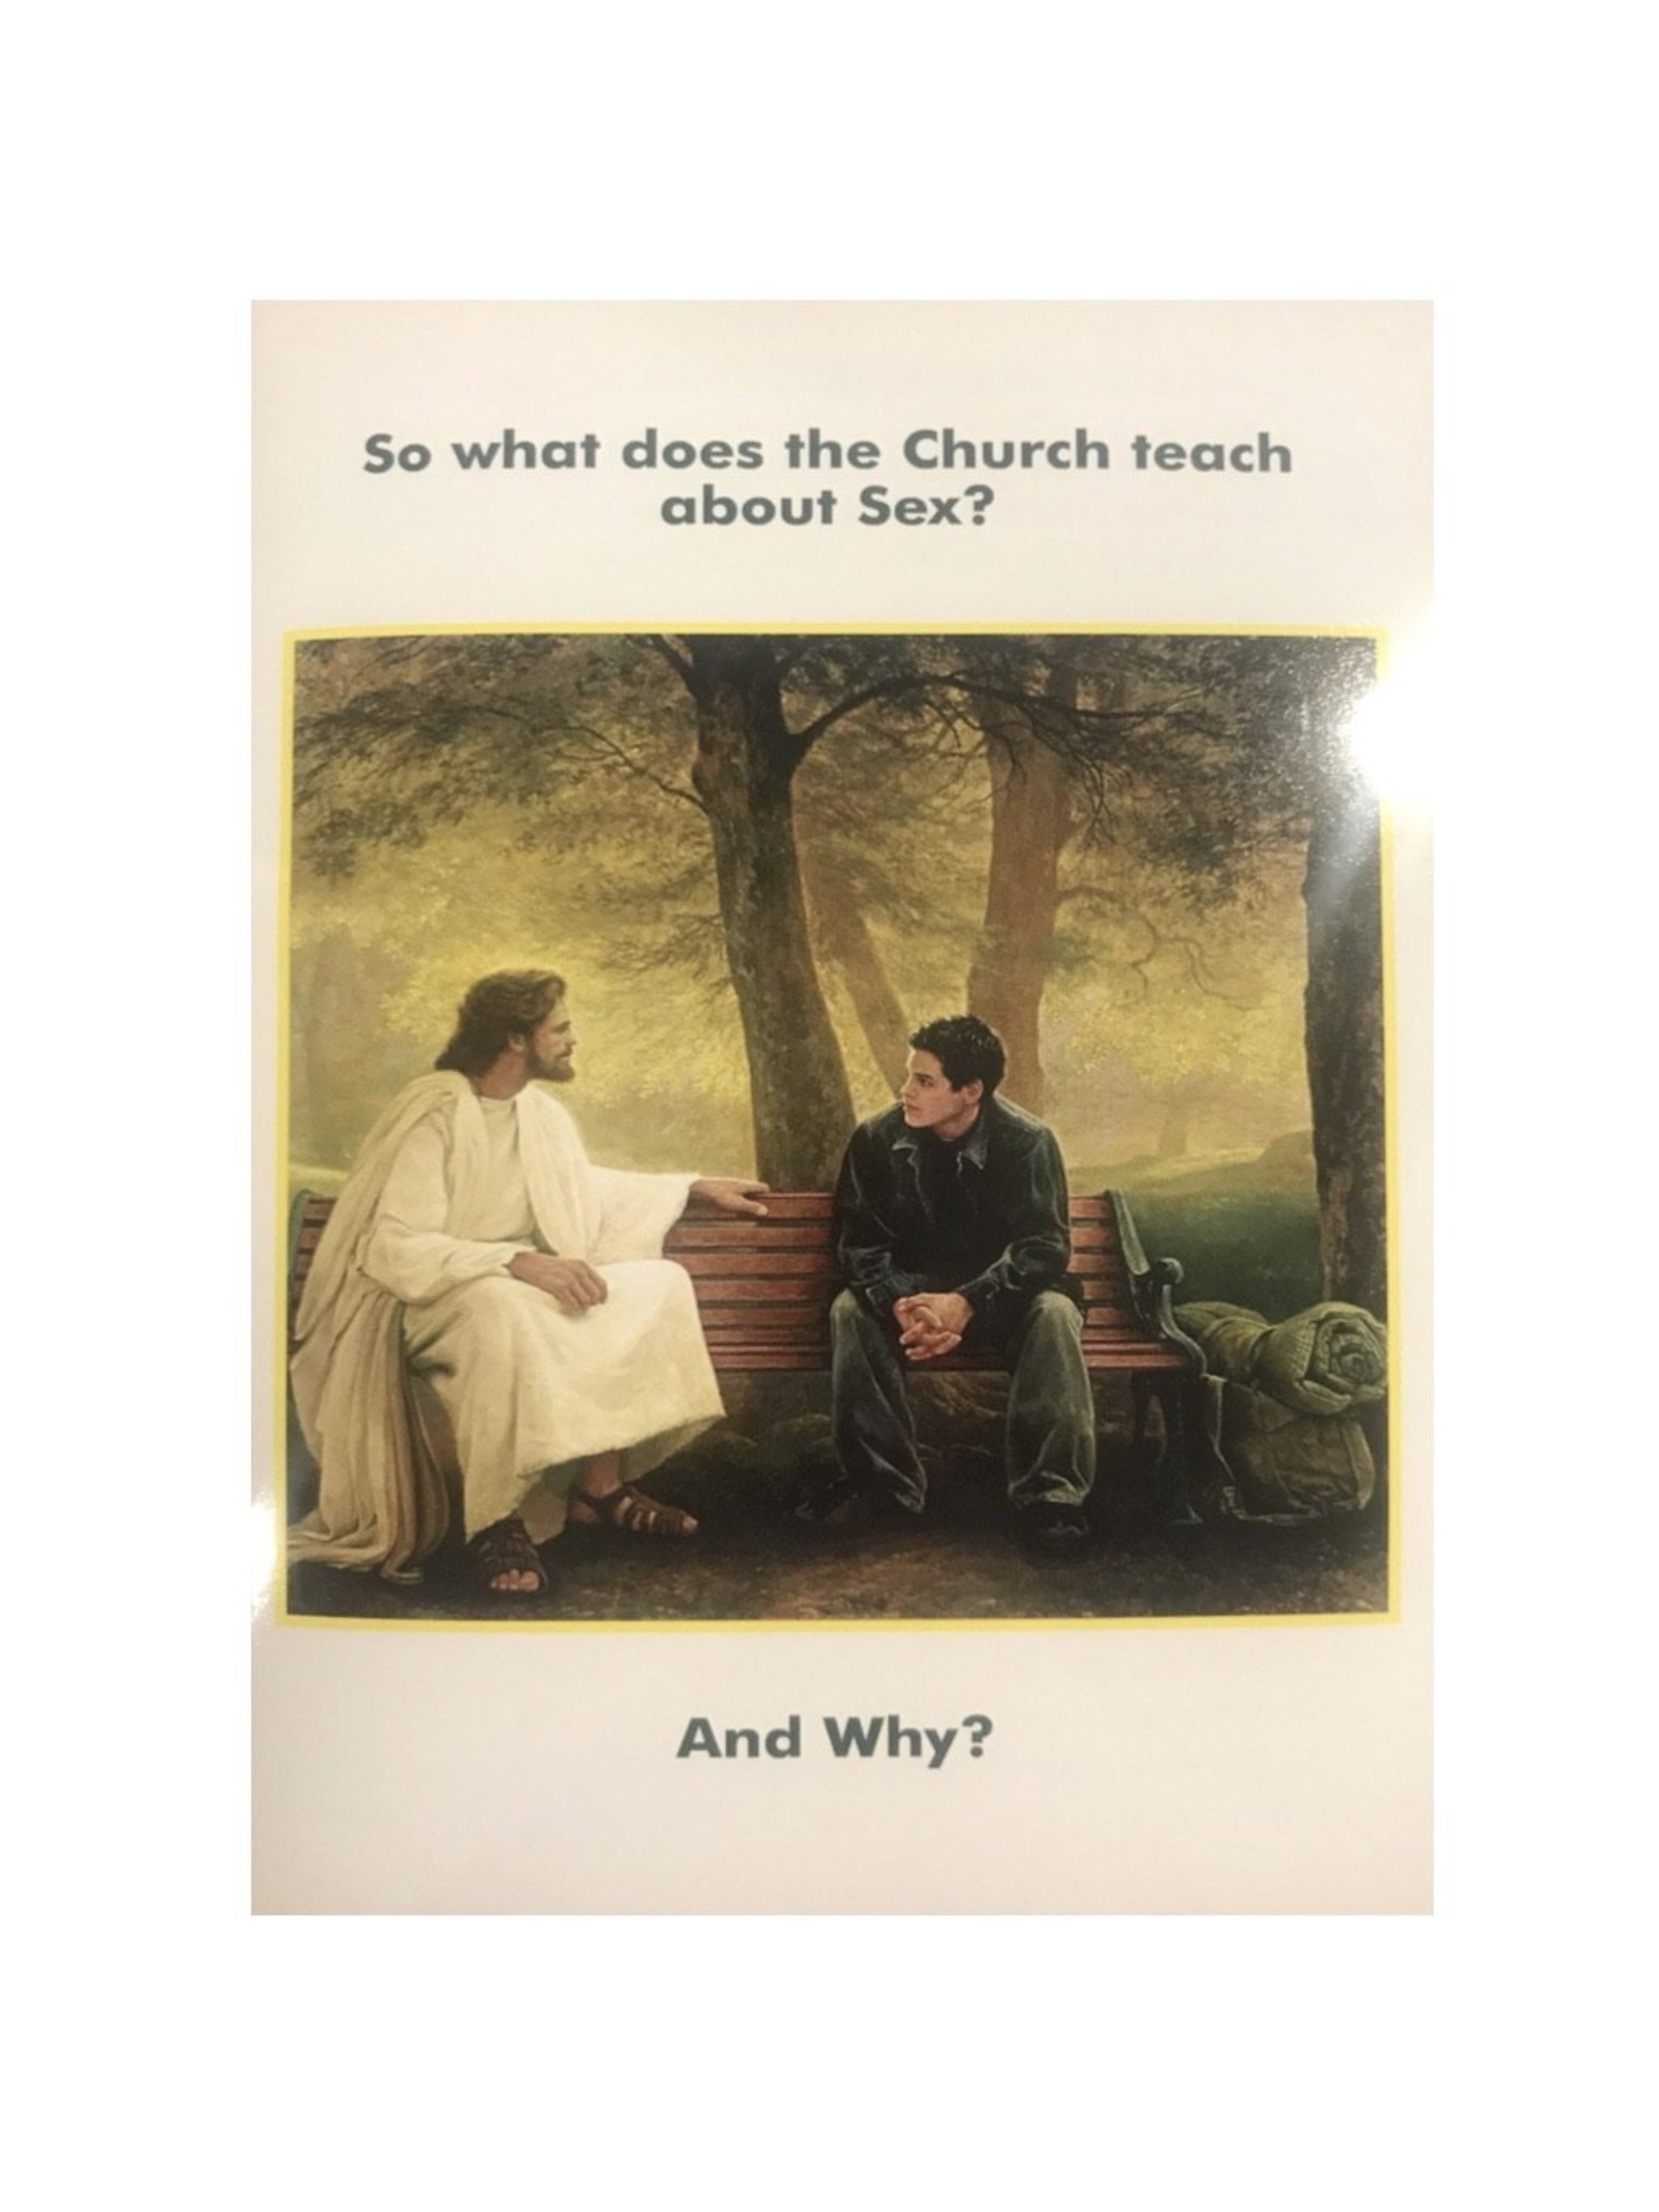 What Does the Church Teach About Sex?